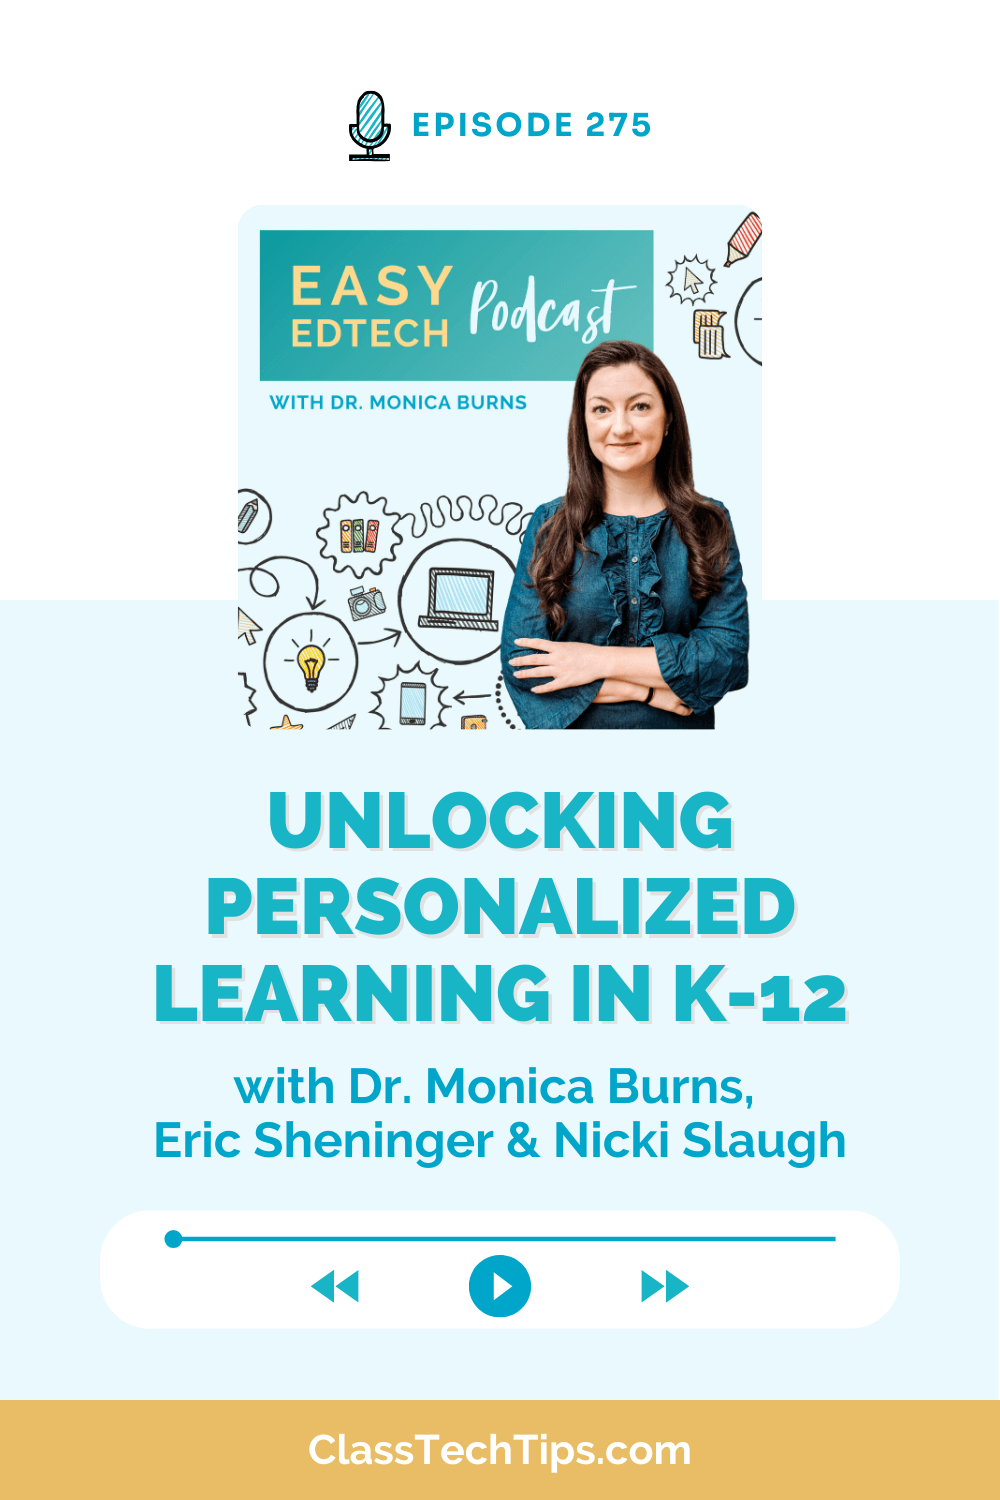 Episode 275 of the Easy EdTech Podcast, featuring Dr. Monica Burns, Eric Sheninger, and Nicki Slaugh, explores strategies for unlocking personalized learning in K-12. Discover tips on differentiating instruction and enhancing student engagement.